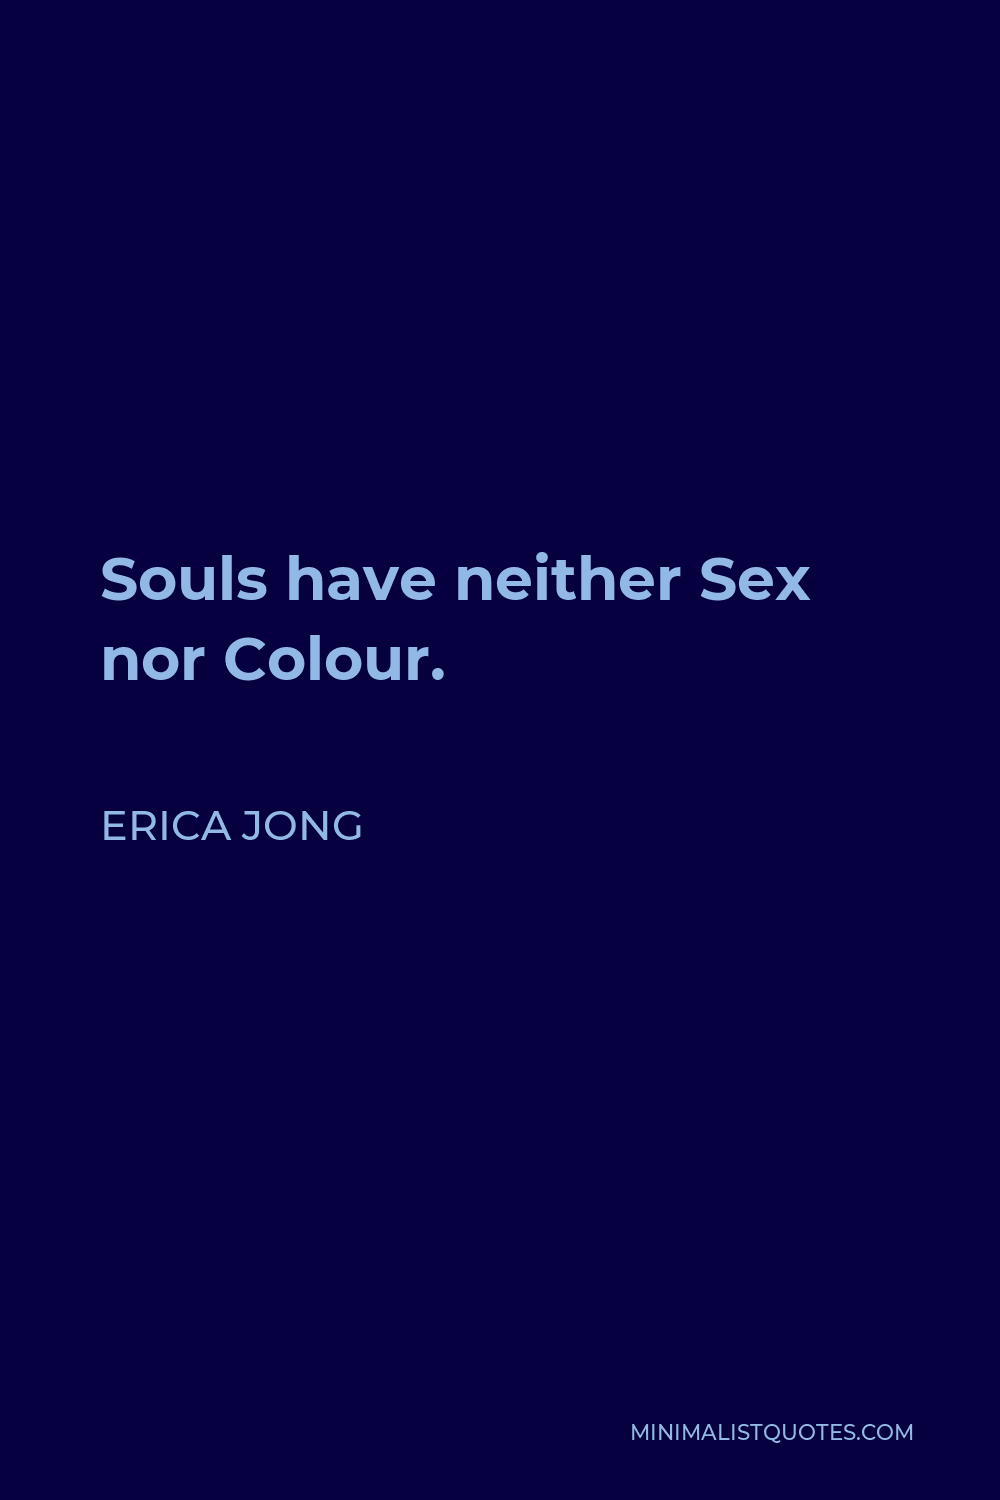 Erica Jong Quote - Souls have neither Sex nor Colour.